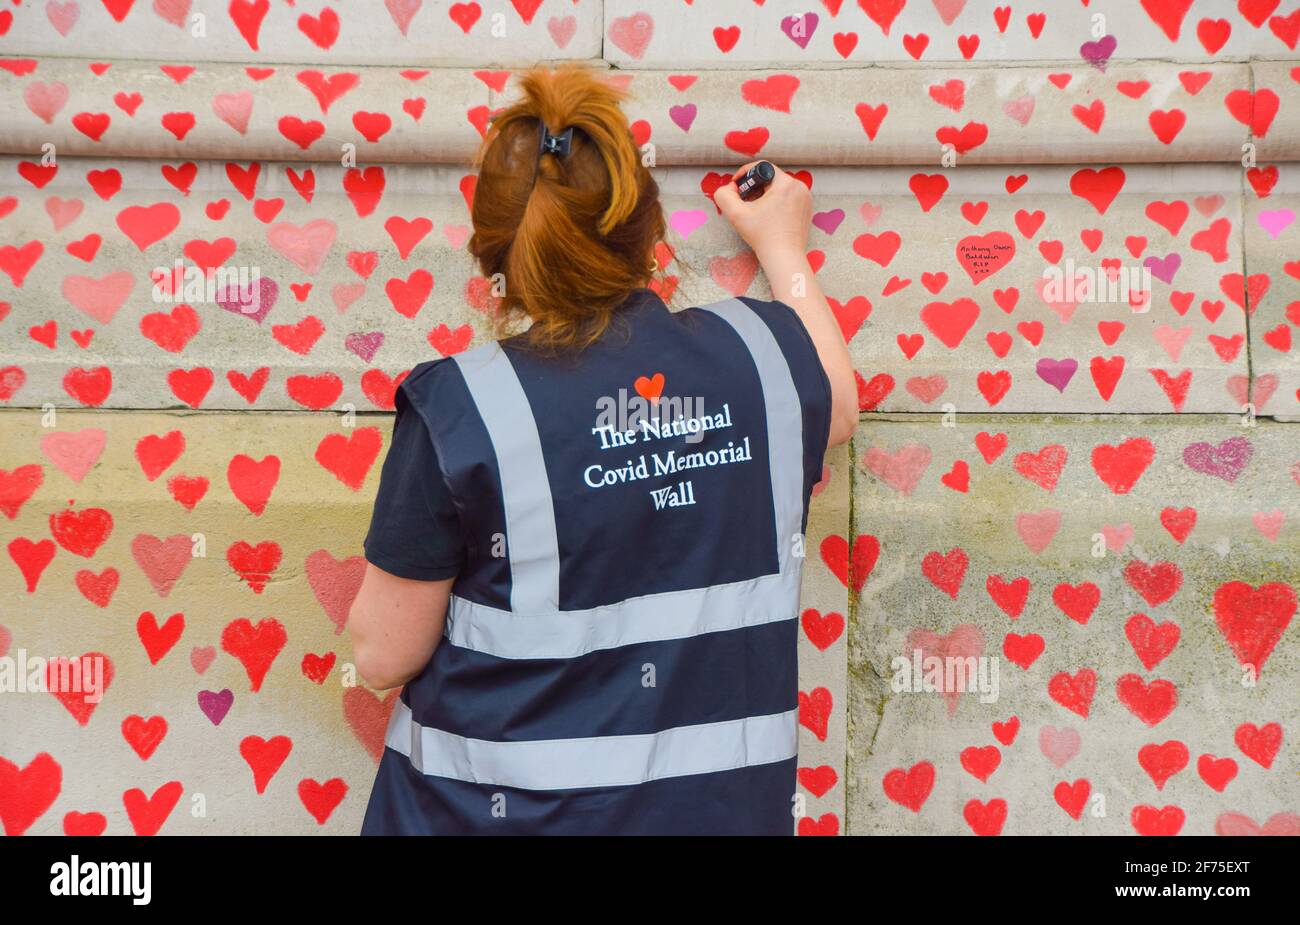 London, United Kingdom. 31st March 2021. A volunteer paints red hearts on the National Covid Memorial Wall. Nearly 150,000 hearts will be painted by volunteers, one for each Covid-19 victim in the UK to date, on the wall outside St Thomas' Hospital on the south bank of the Thames opposite Houses Of Parliament. Stock Photo